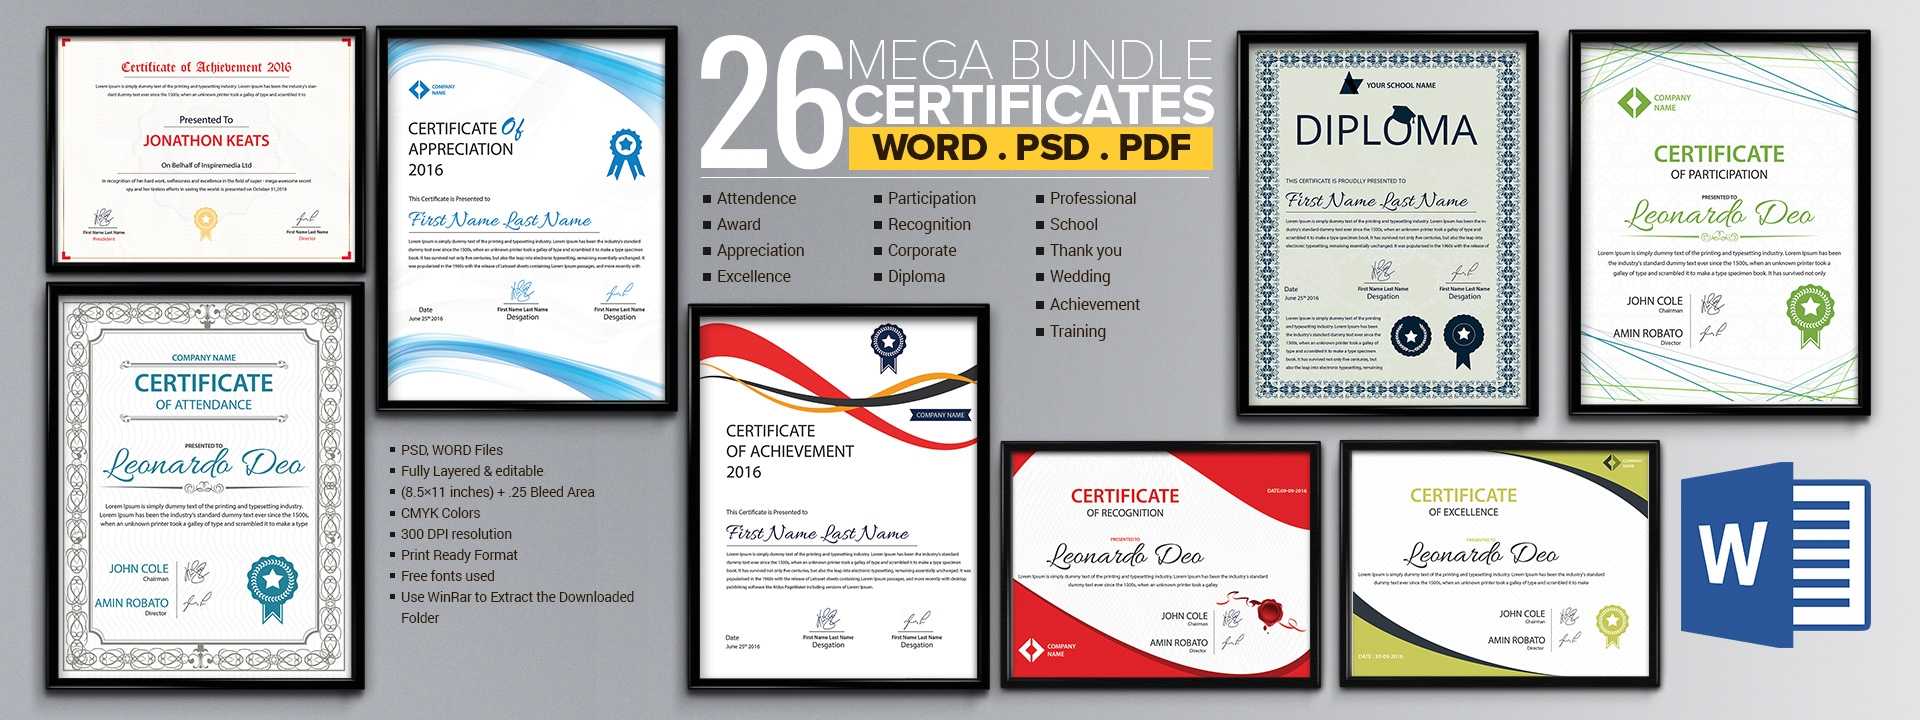 Word Certificate Template - 53+ Free Download Samples Inside Award Certificate Templates Word 2007